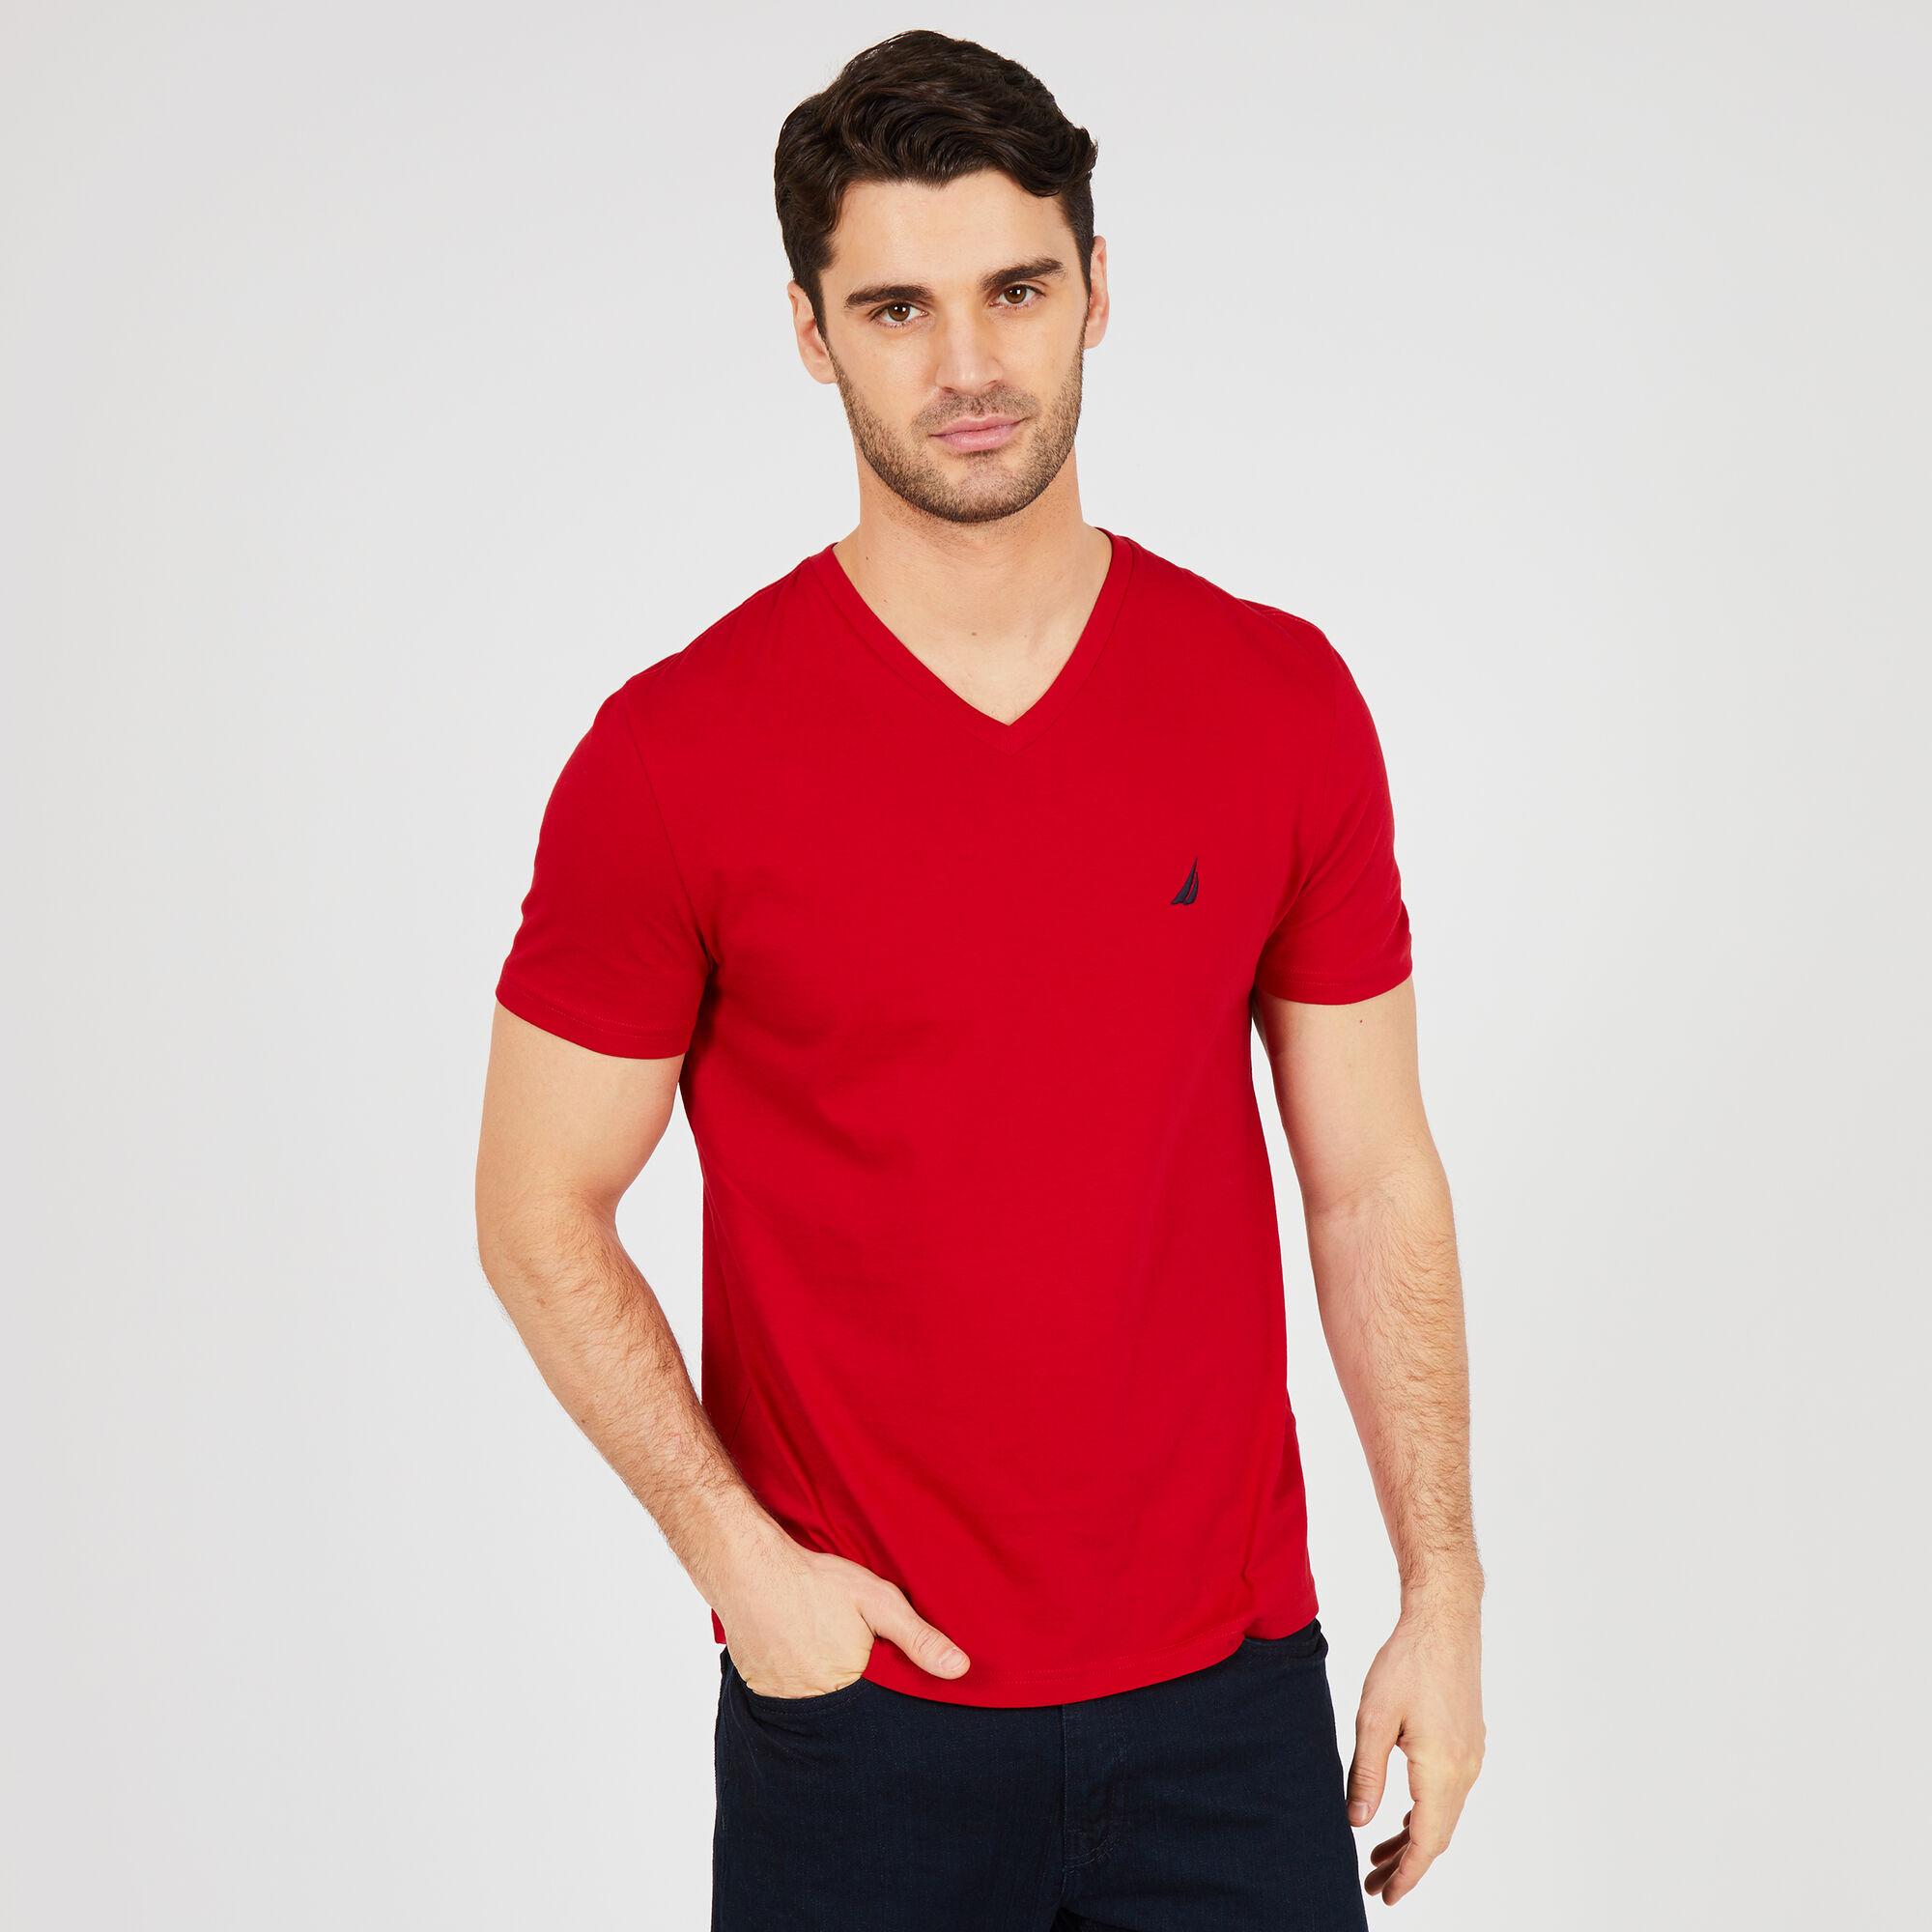  V- Neck Solid S/S Tee - Nautica Red